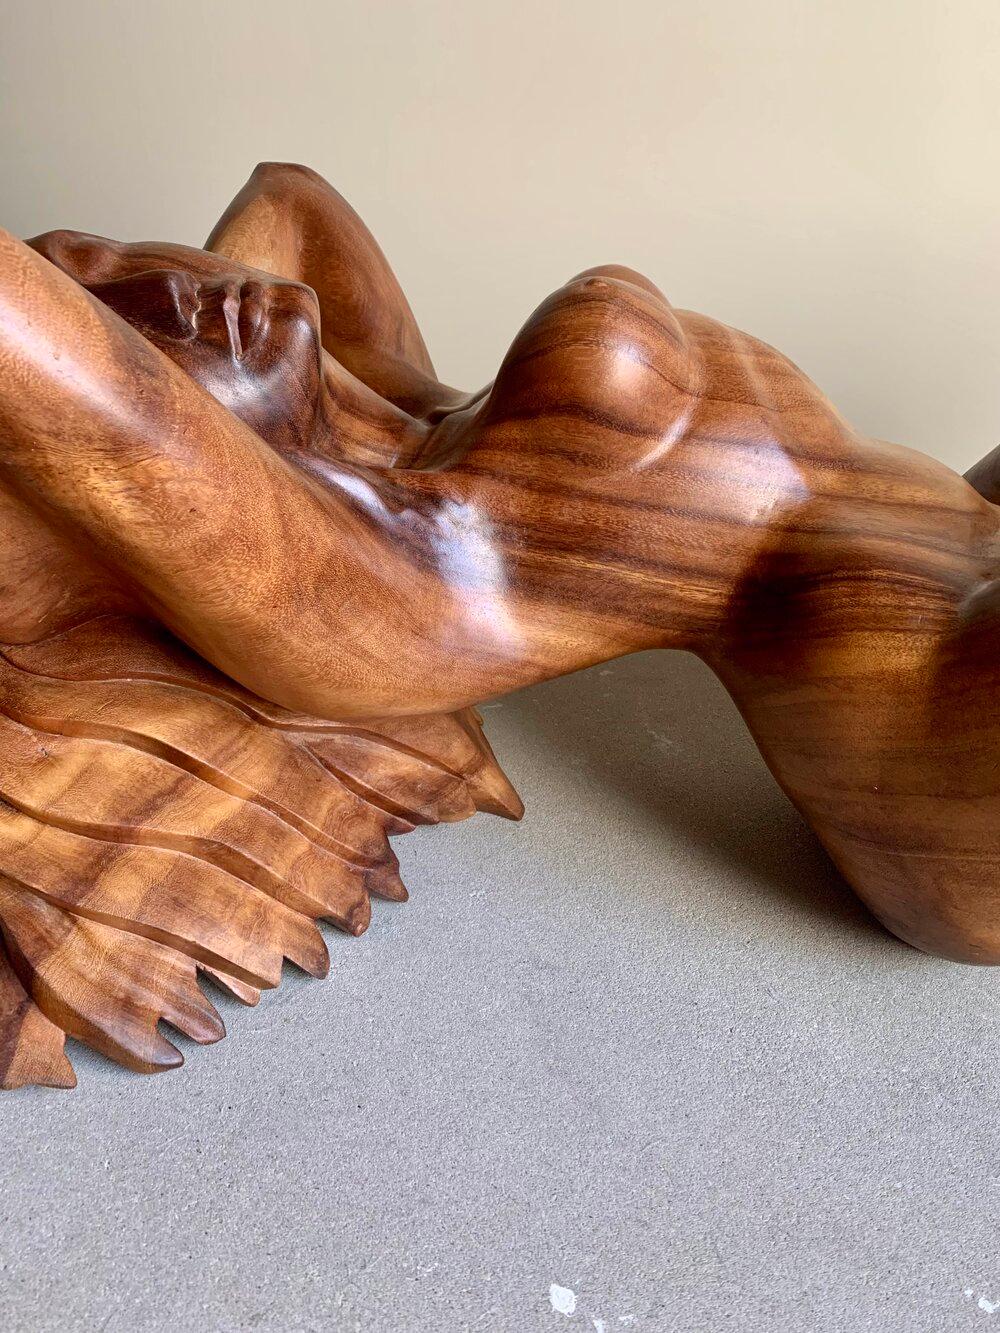 Vintage Hand-Carved Wooden Female Nude Sculpture Coffee Table Base In Good Condition For Sale In Rīga, LV